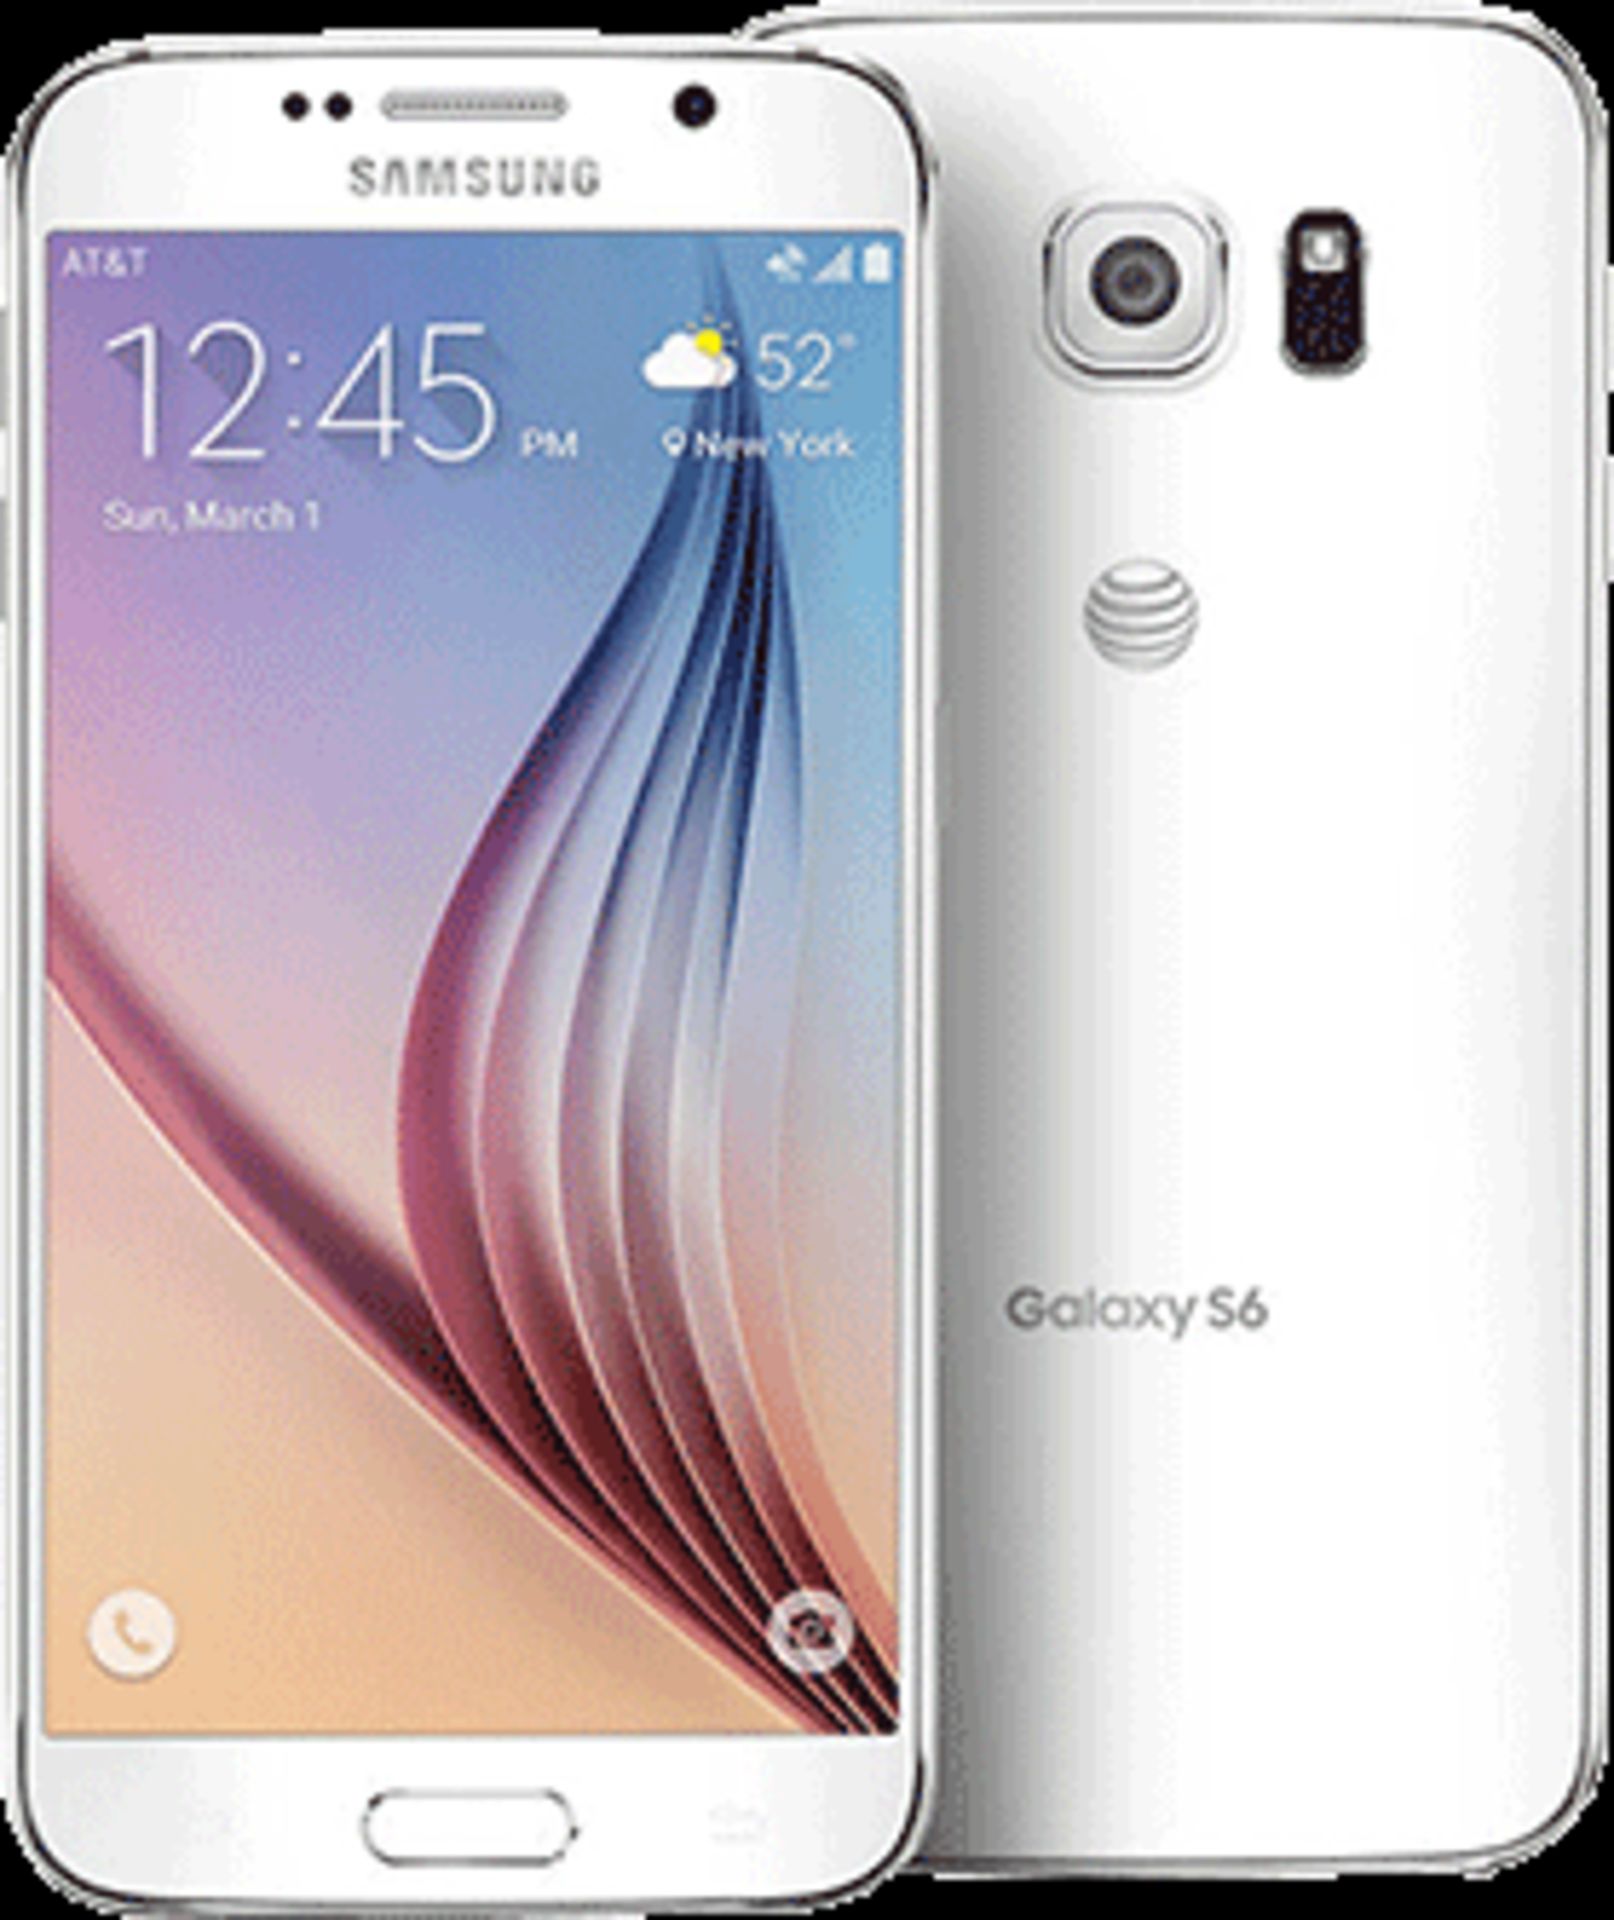 No VAT Grade U Samsung Galaxy S6 White 32gb Mobile Phone Boxed With Some Accessories May Include 1